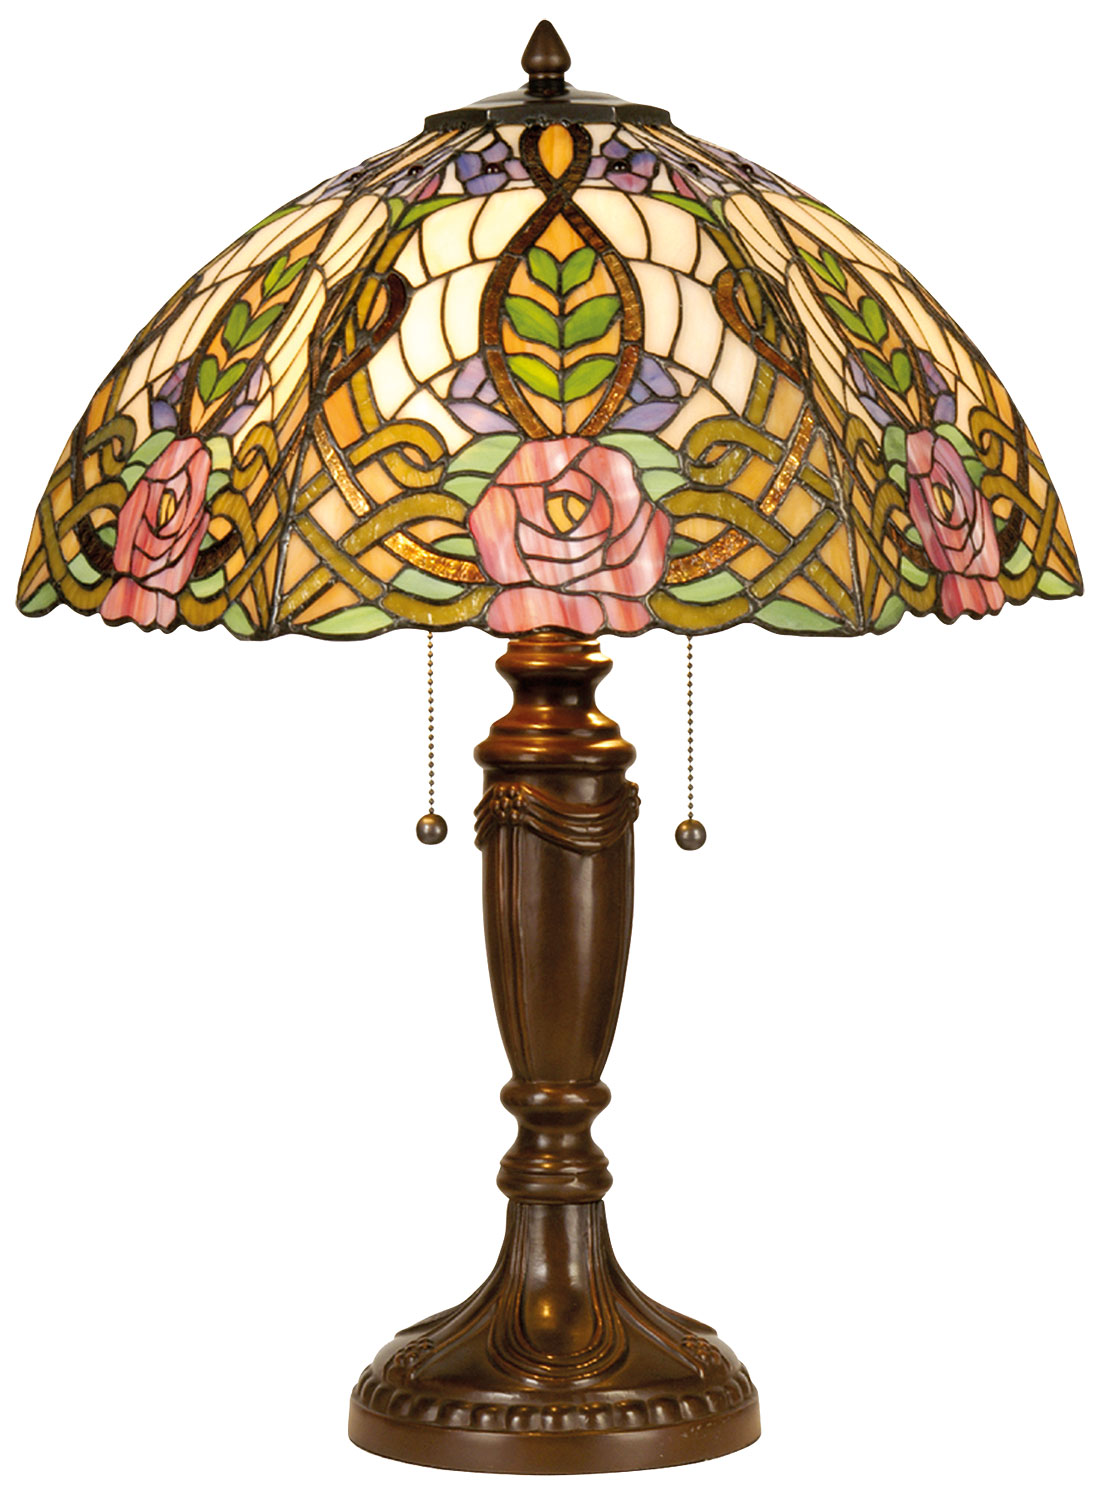 Table lamp "Roses" - after Charles Rennie Mackintosh